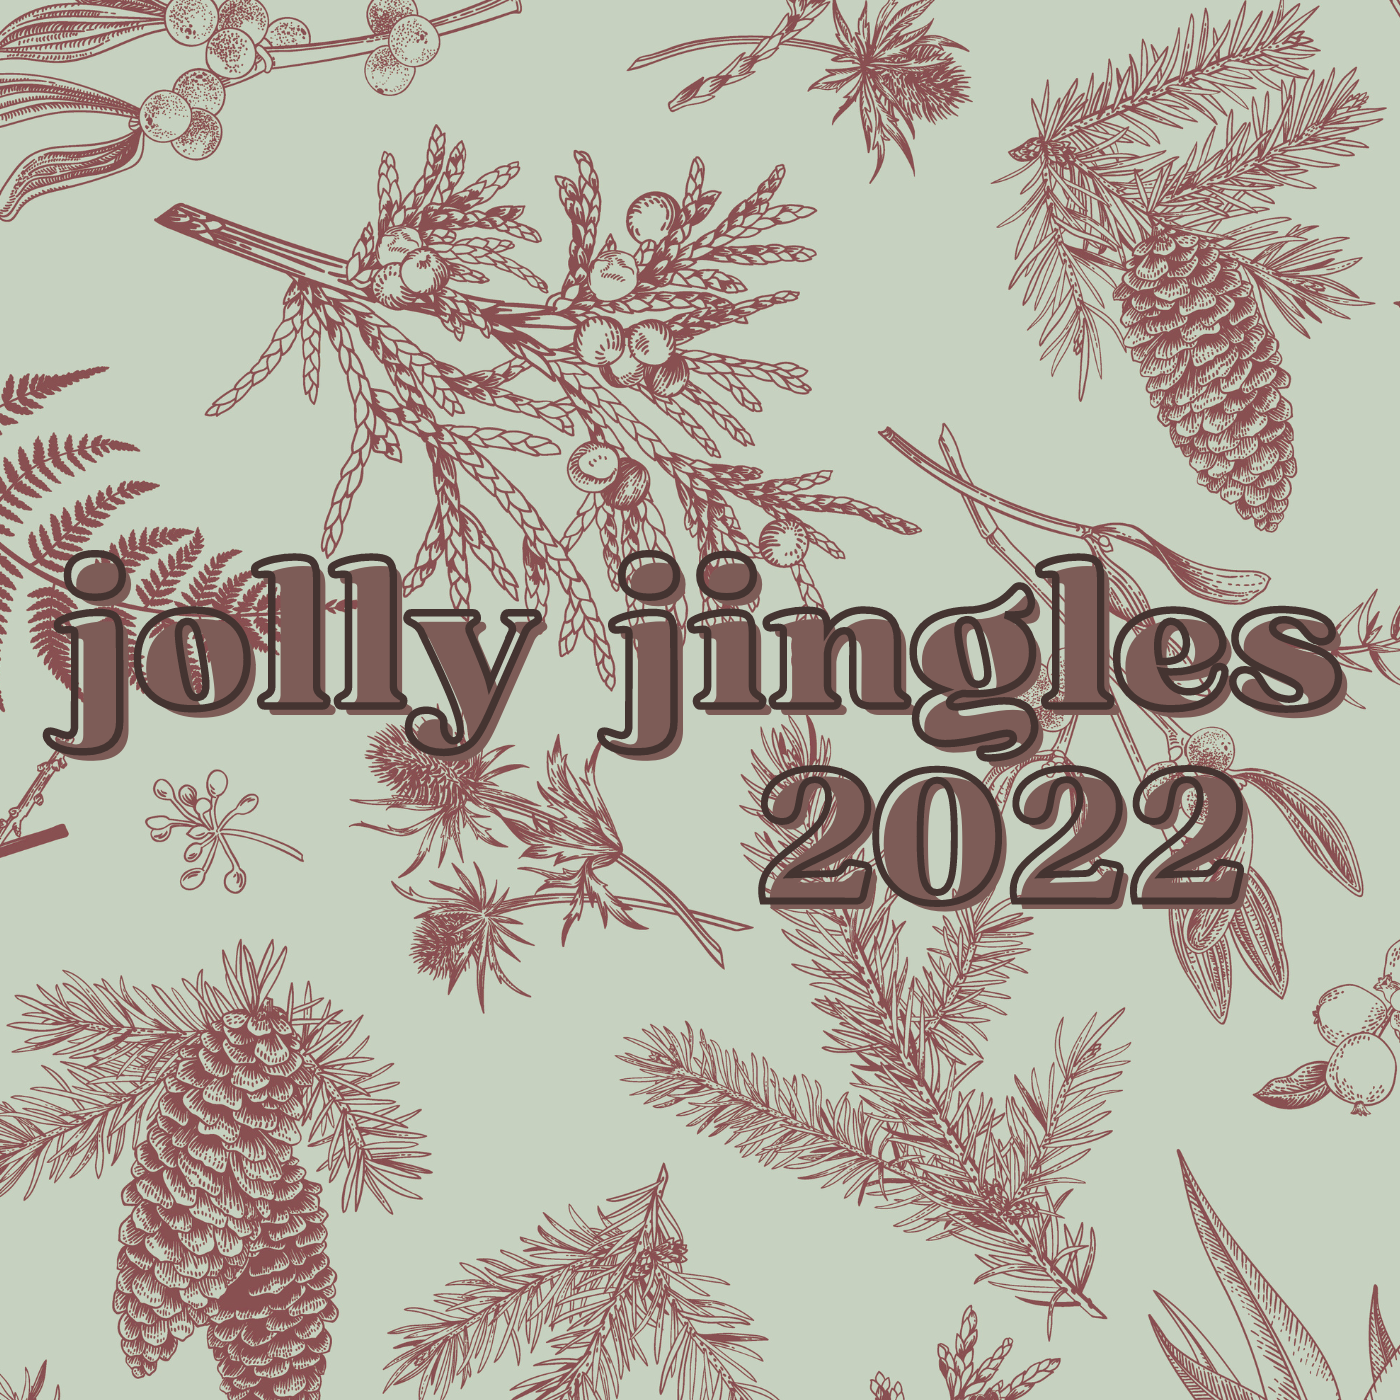 a square image of line drawings of winter plants like cedar and pinecones with jolly jingles 2022 at the center